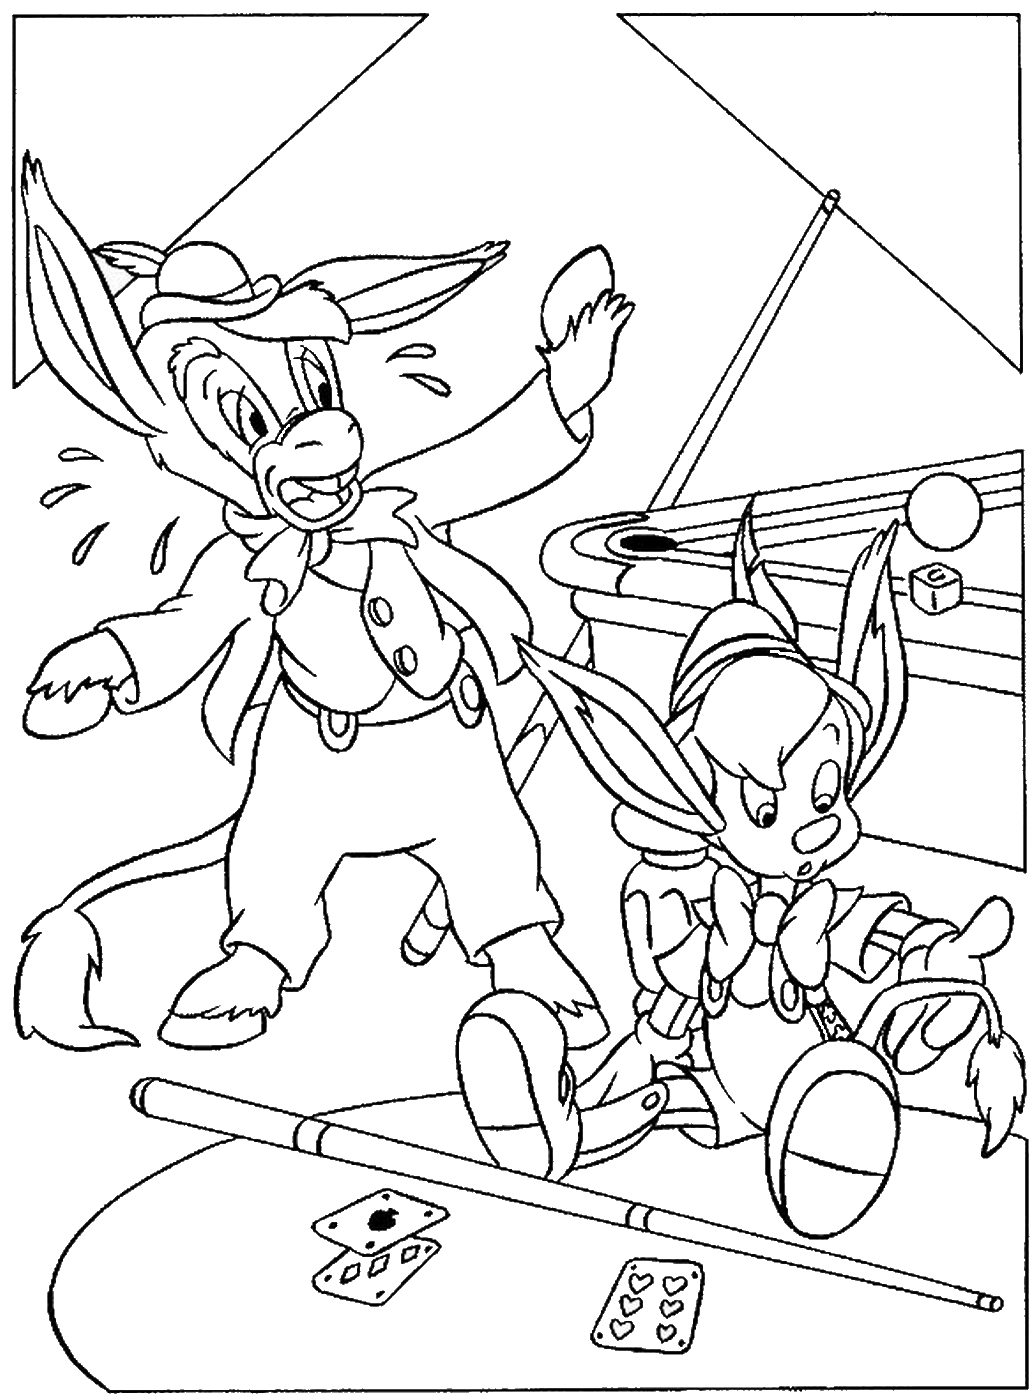 Pinocchio Coloring Pages TV Film Pinocchio_coloring_5 Printable 2020 06335 Coloring4free